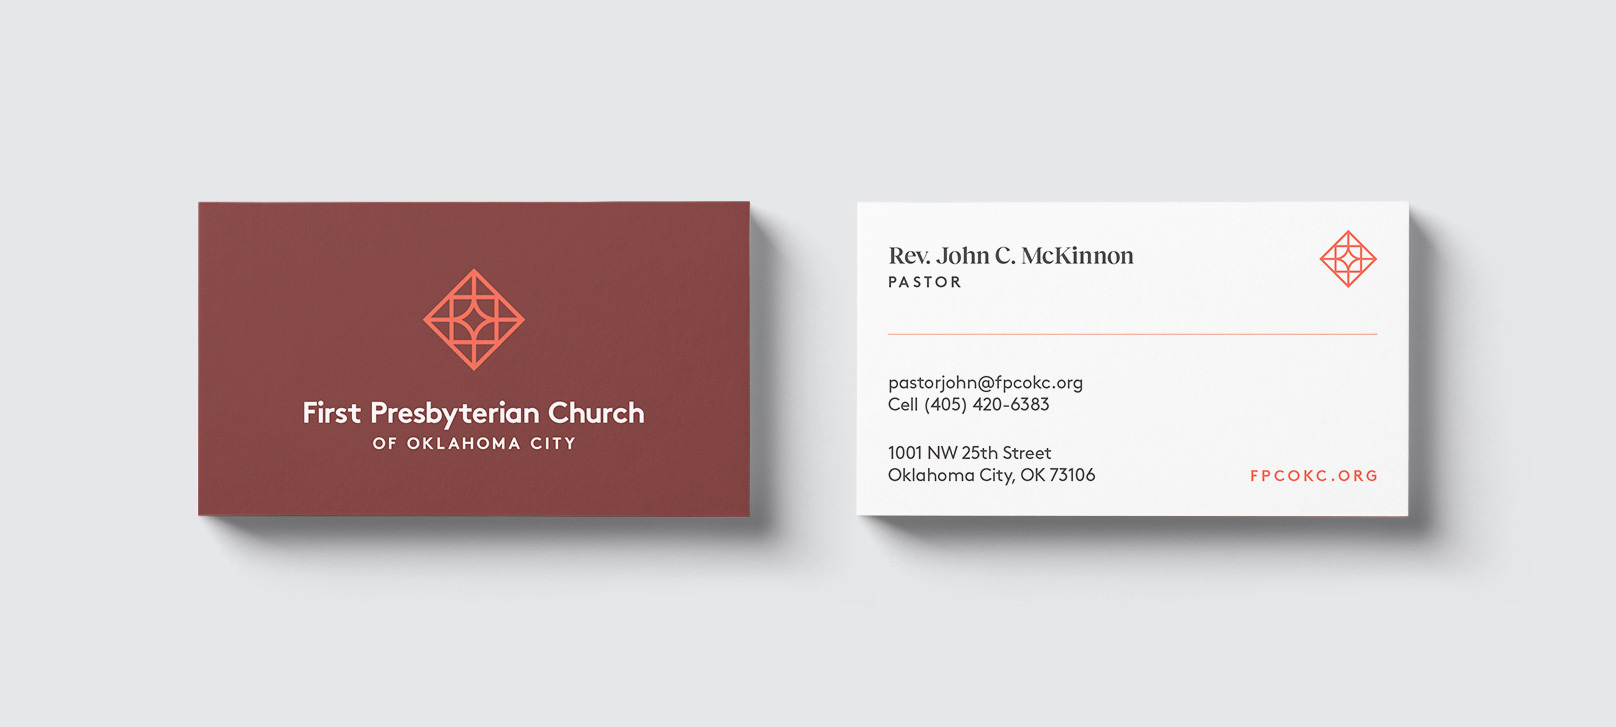 New Logo and Identity for First Presbyterian Church of Oklahoma City by J.D. Reeves